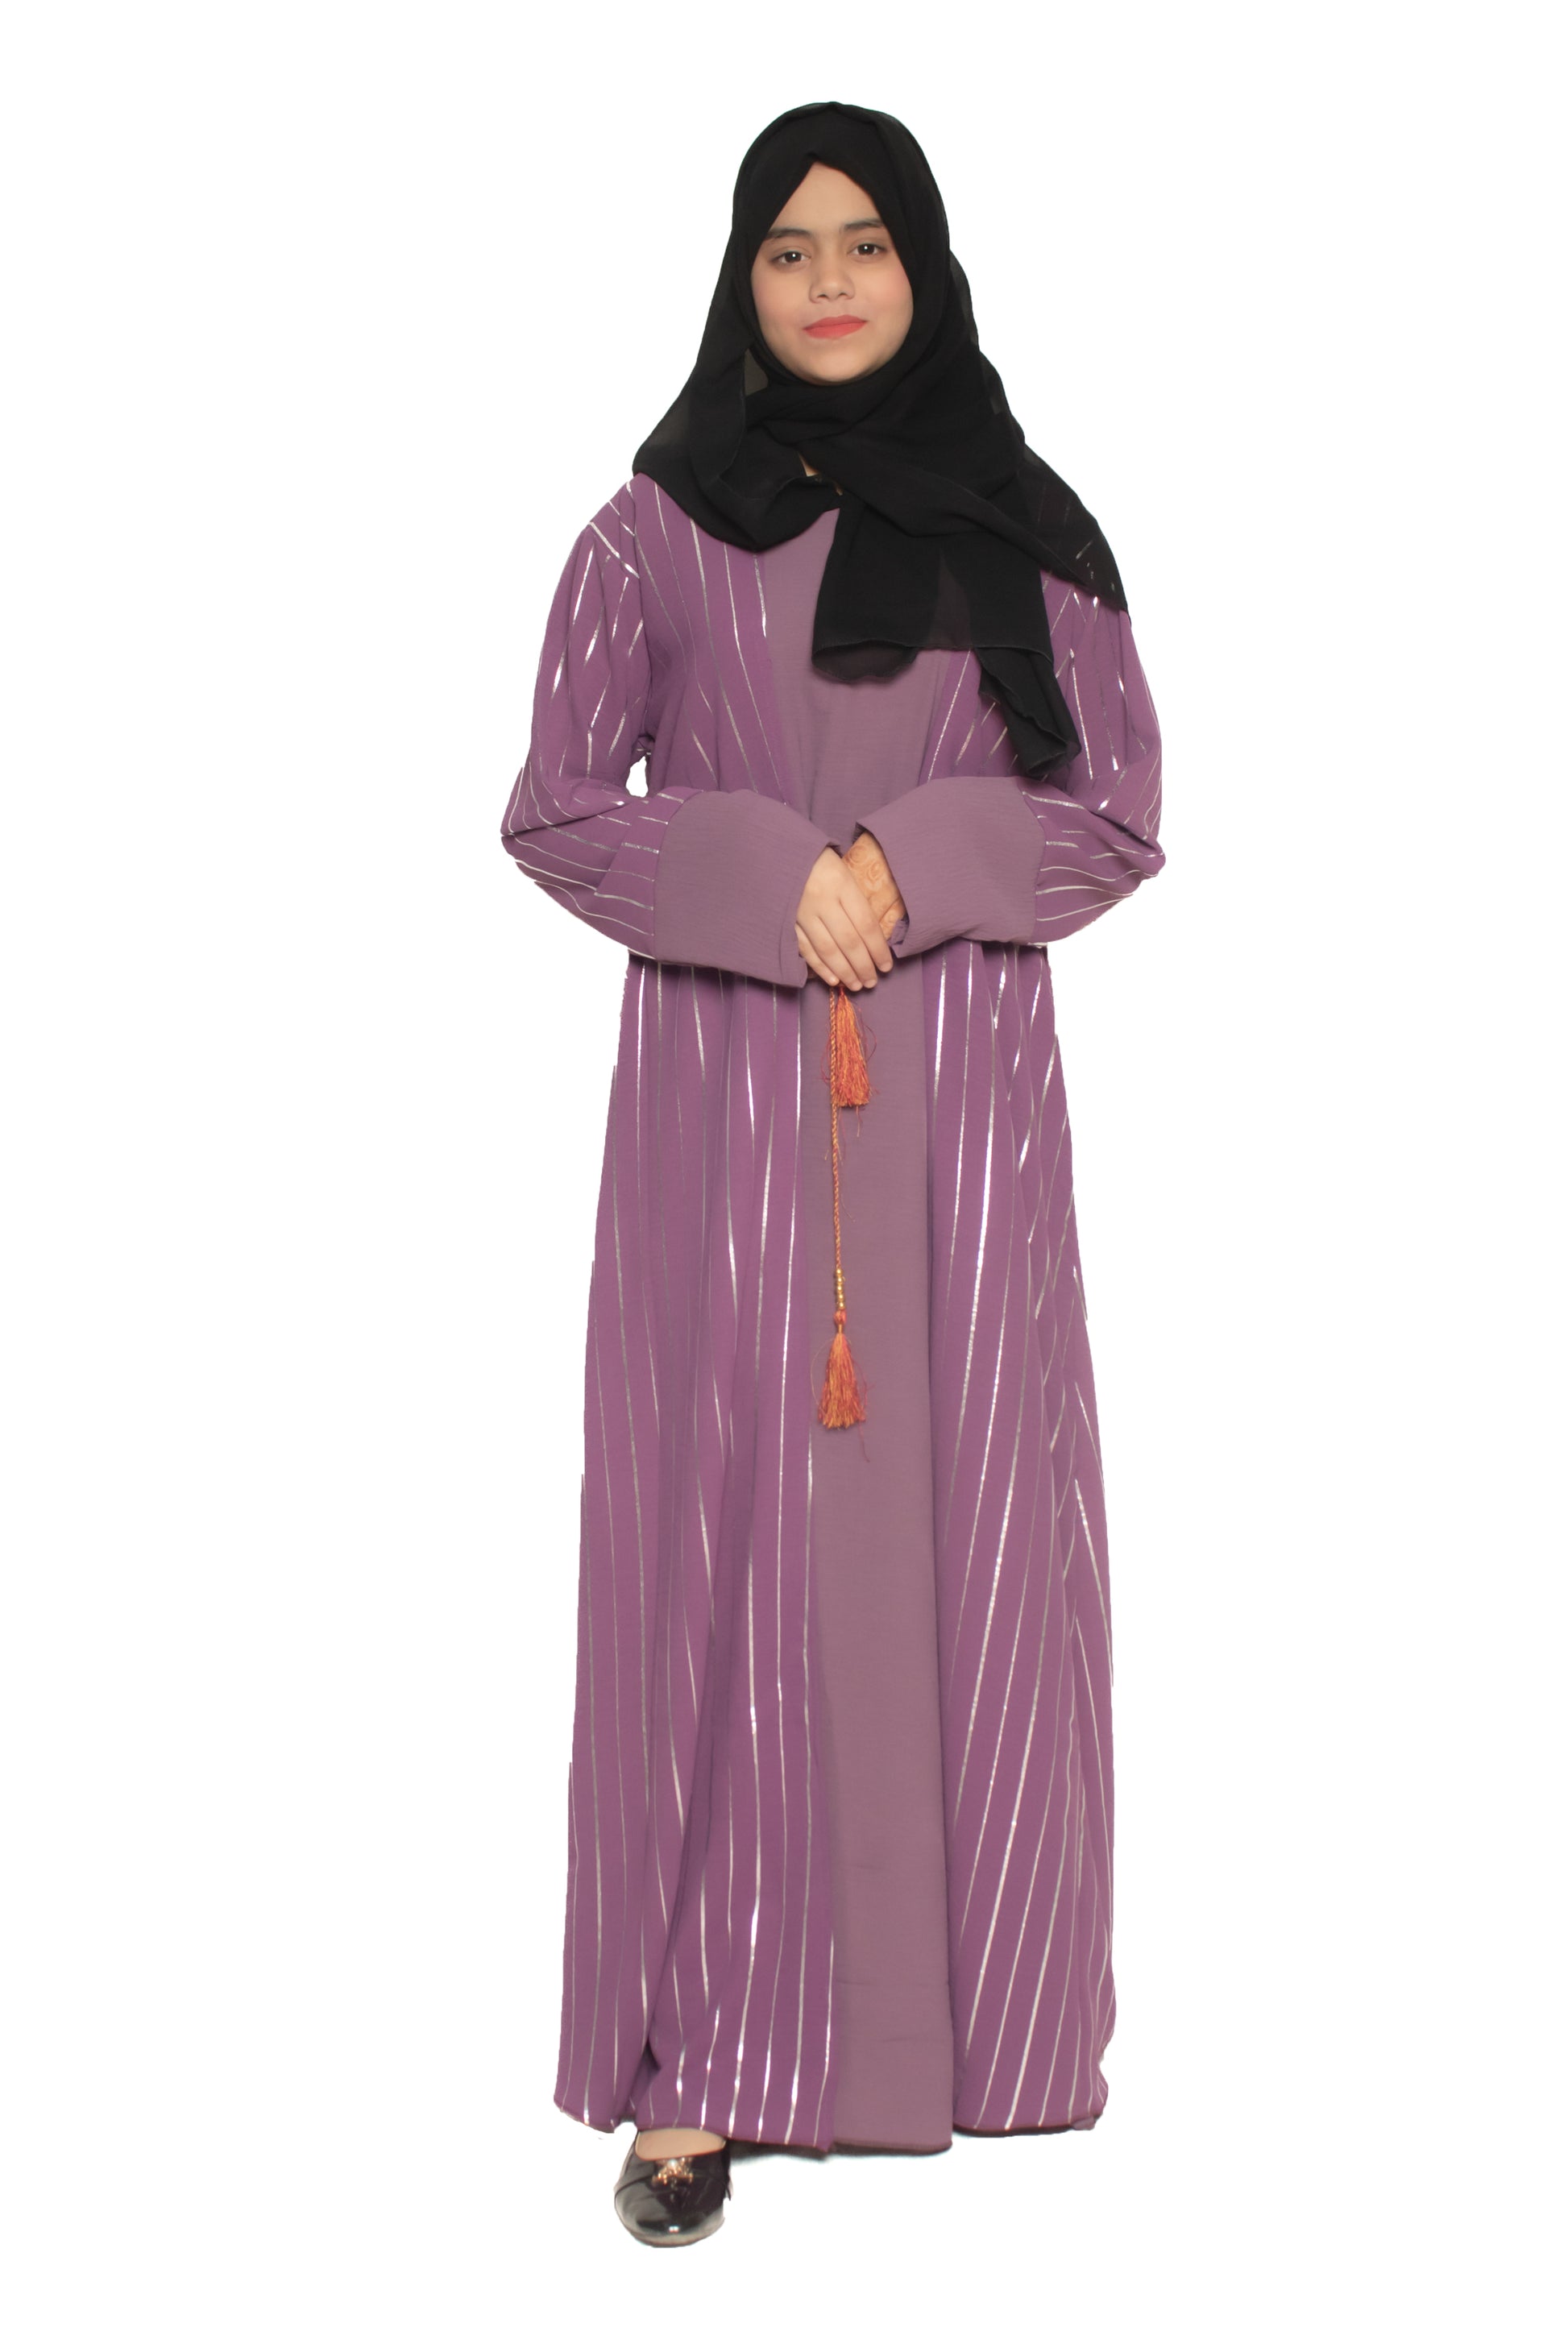 Modest City Self Design Purple Parallel Stripes With Ribbon Abaya or Burqa With Hijab for Women & Girls-Series Laiba